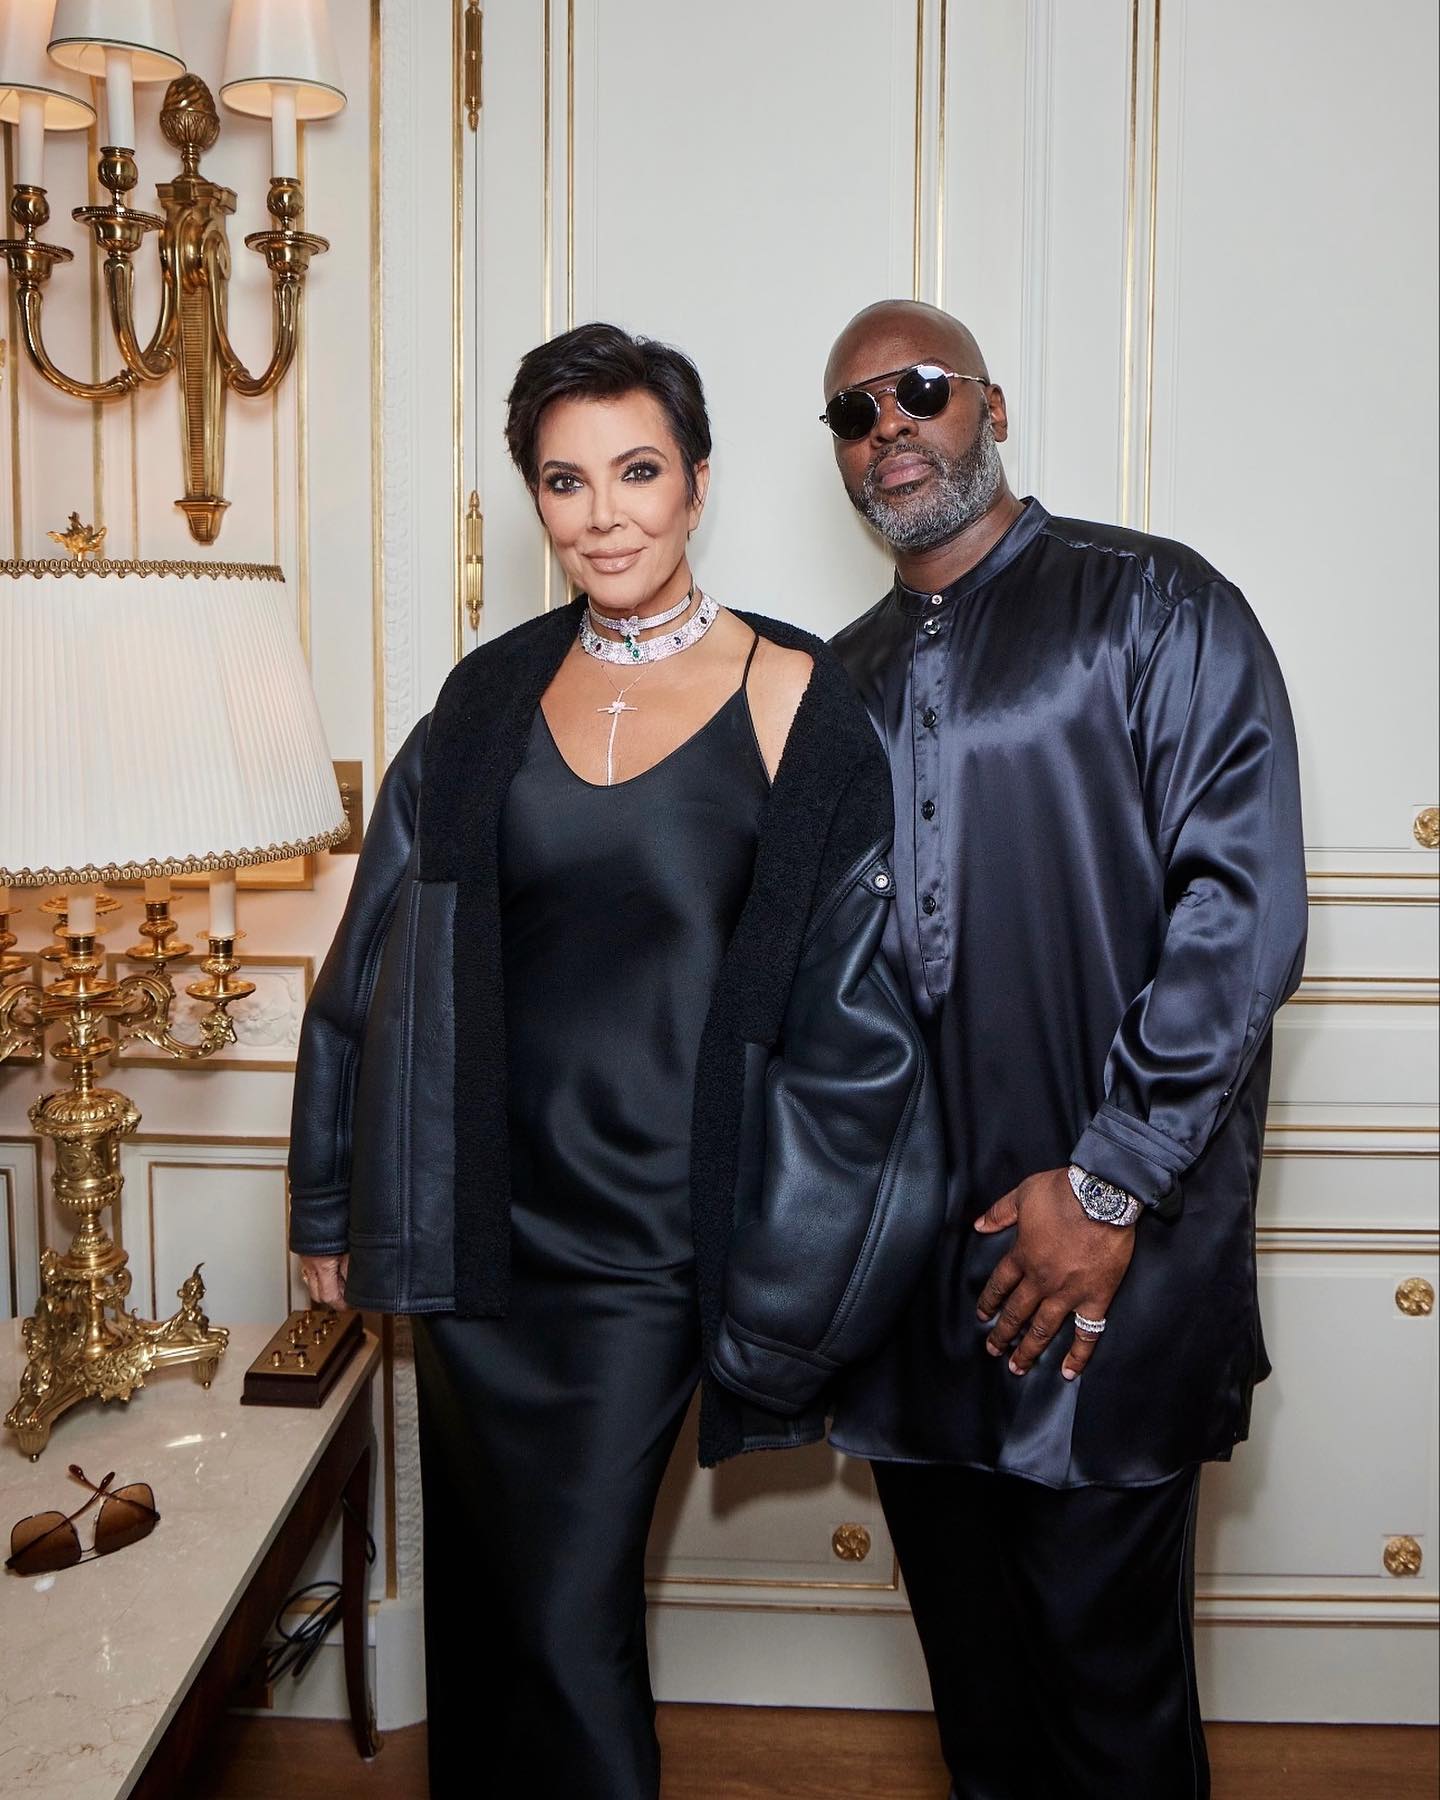 Kris stunned in a Dolce and Gabbana dress while pictured with her boyfriend Corey Gamble